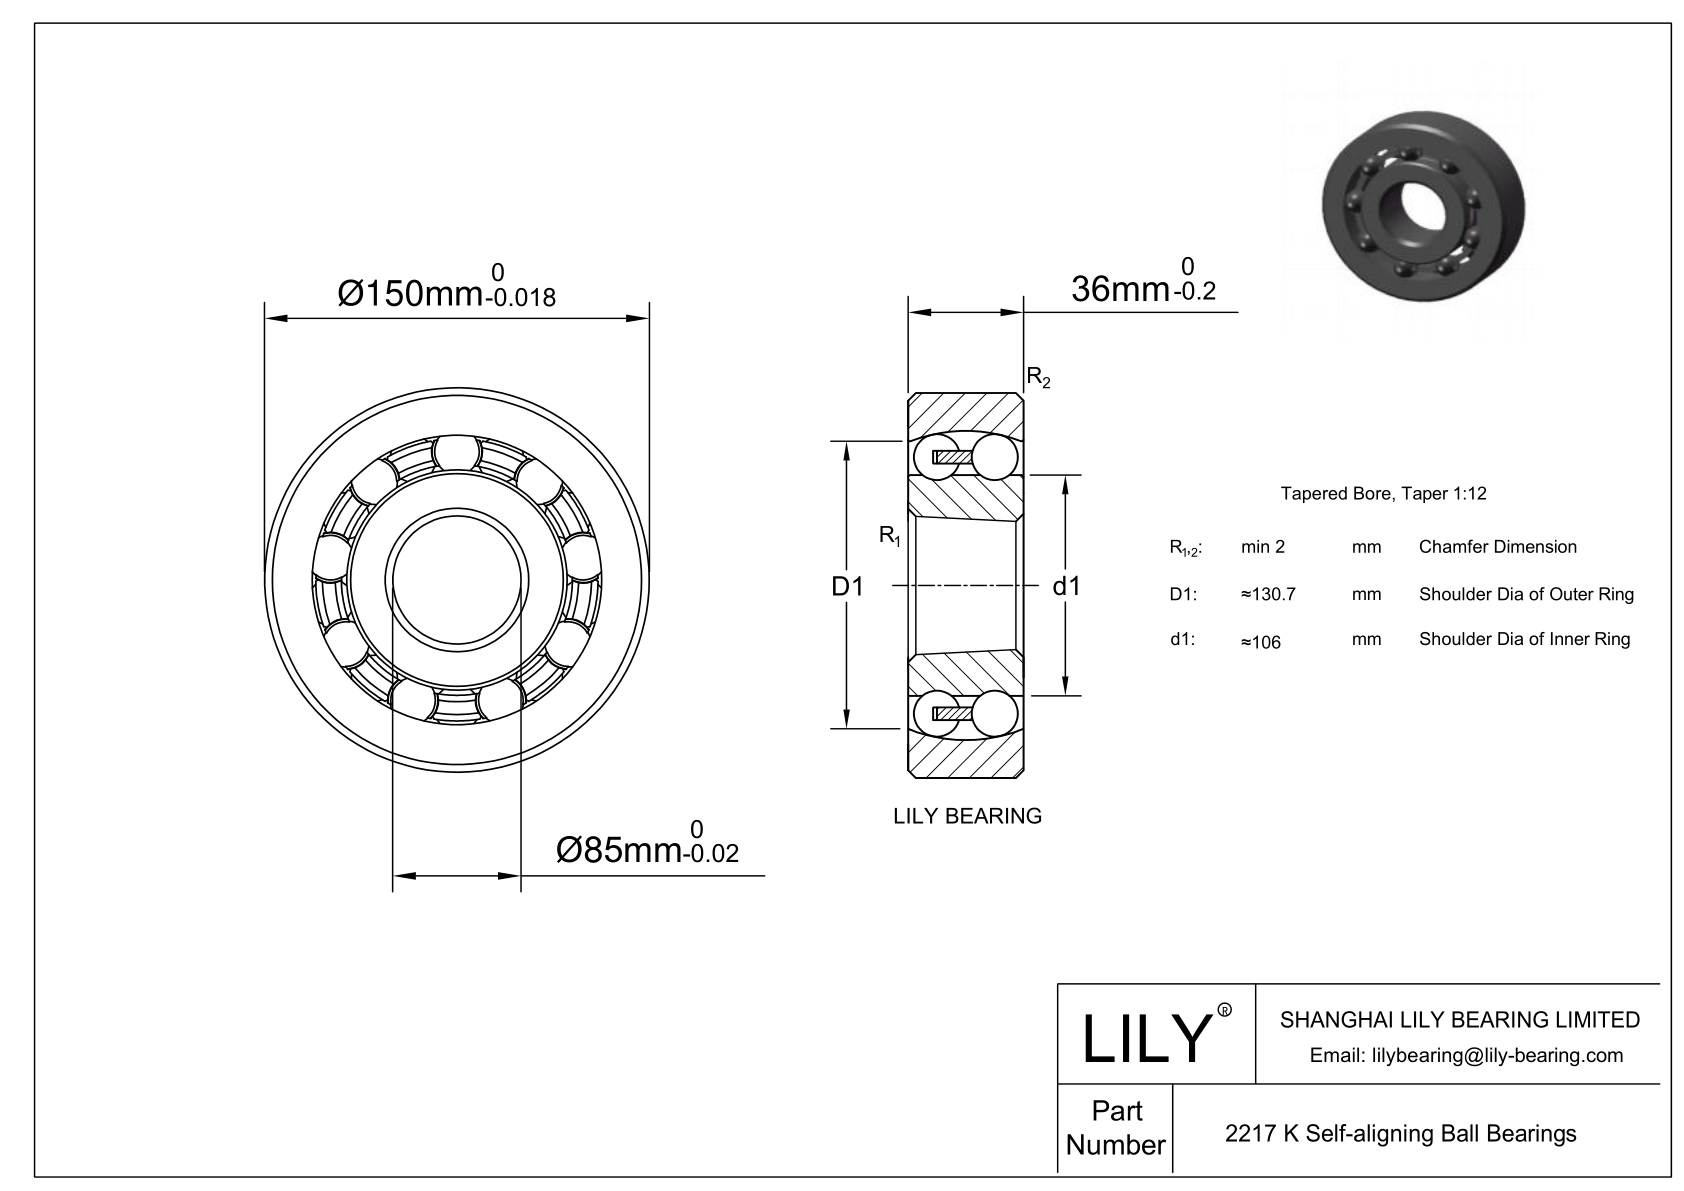 S2217 K Stainless Steel Self Aligning Ball Bearings cad drawing